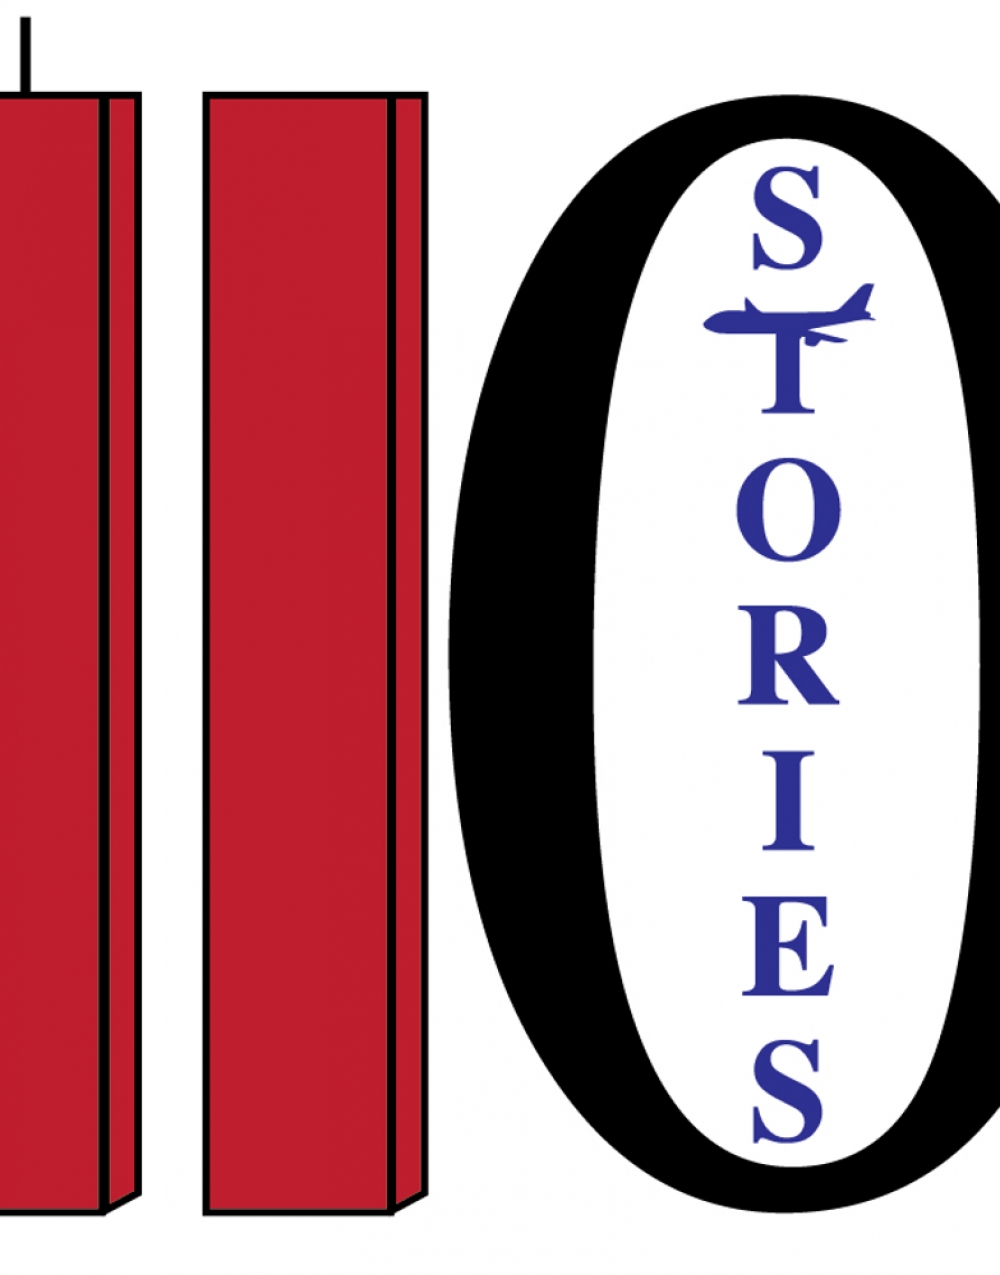 110 STORIES - Forge Theatre Stage Mag